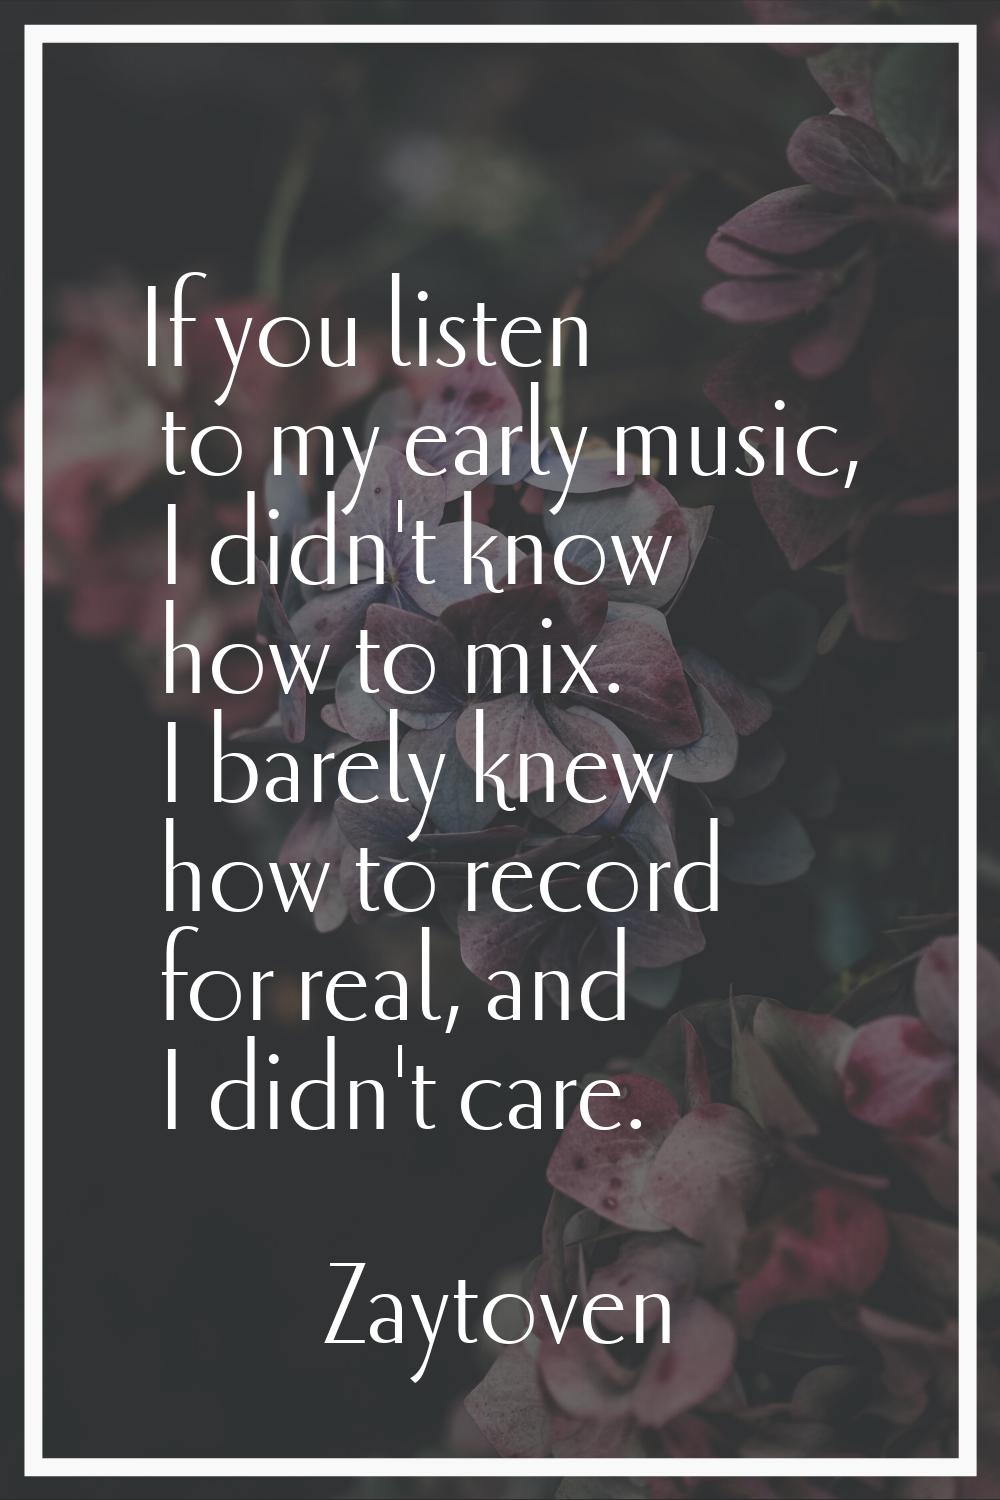 If you listen to my early music, I didn't know how to mix. I barely knew how to record for real, an